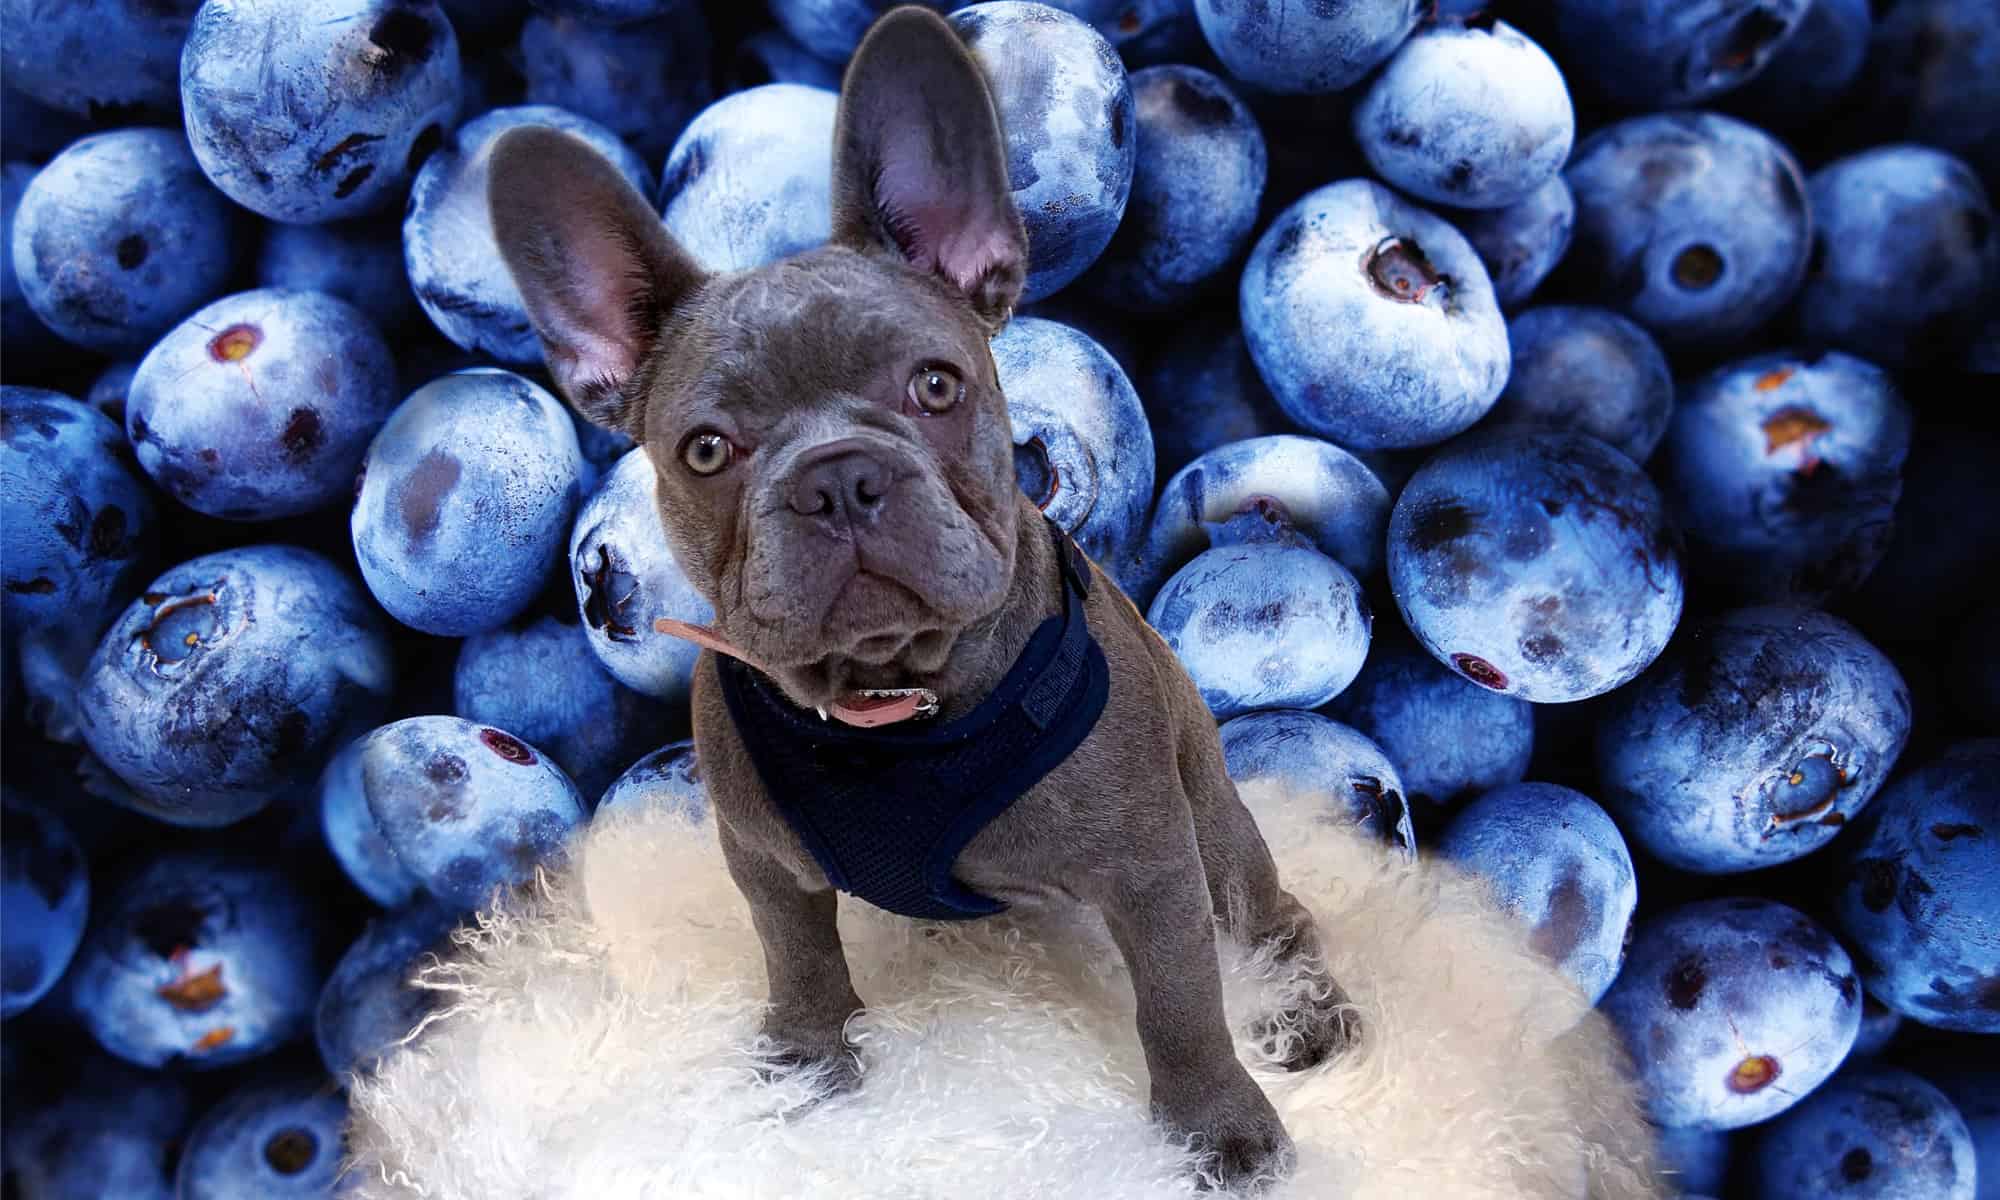 French bulldog surrounded by giant blueberries